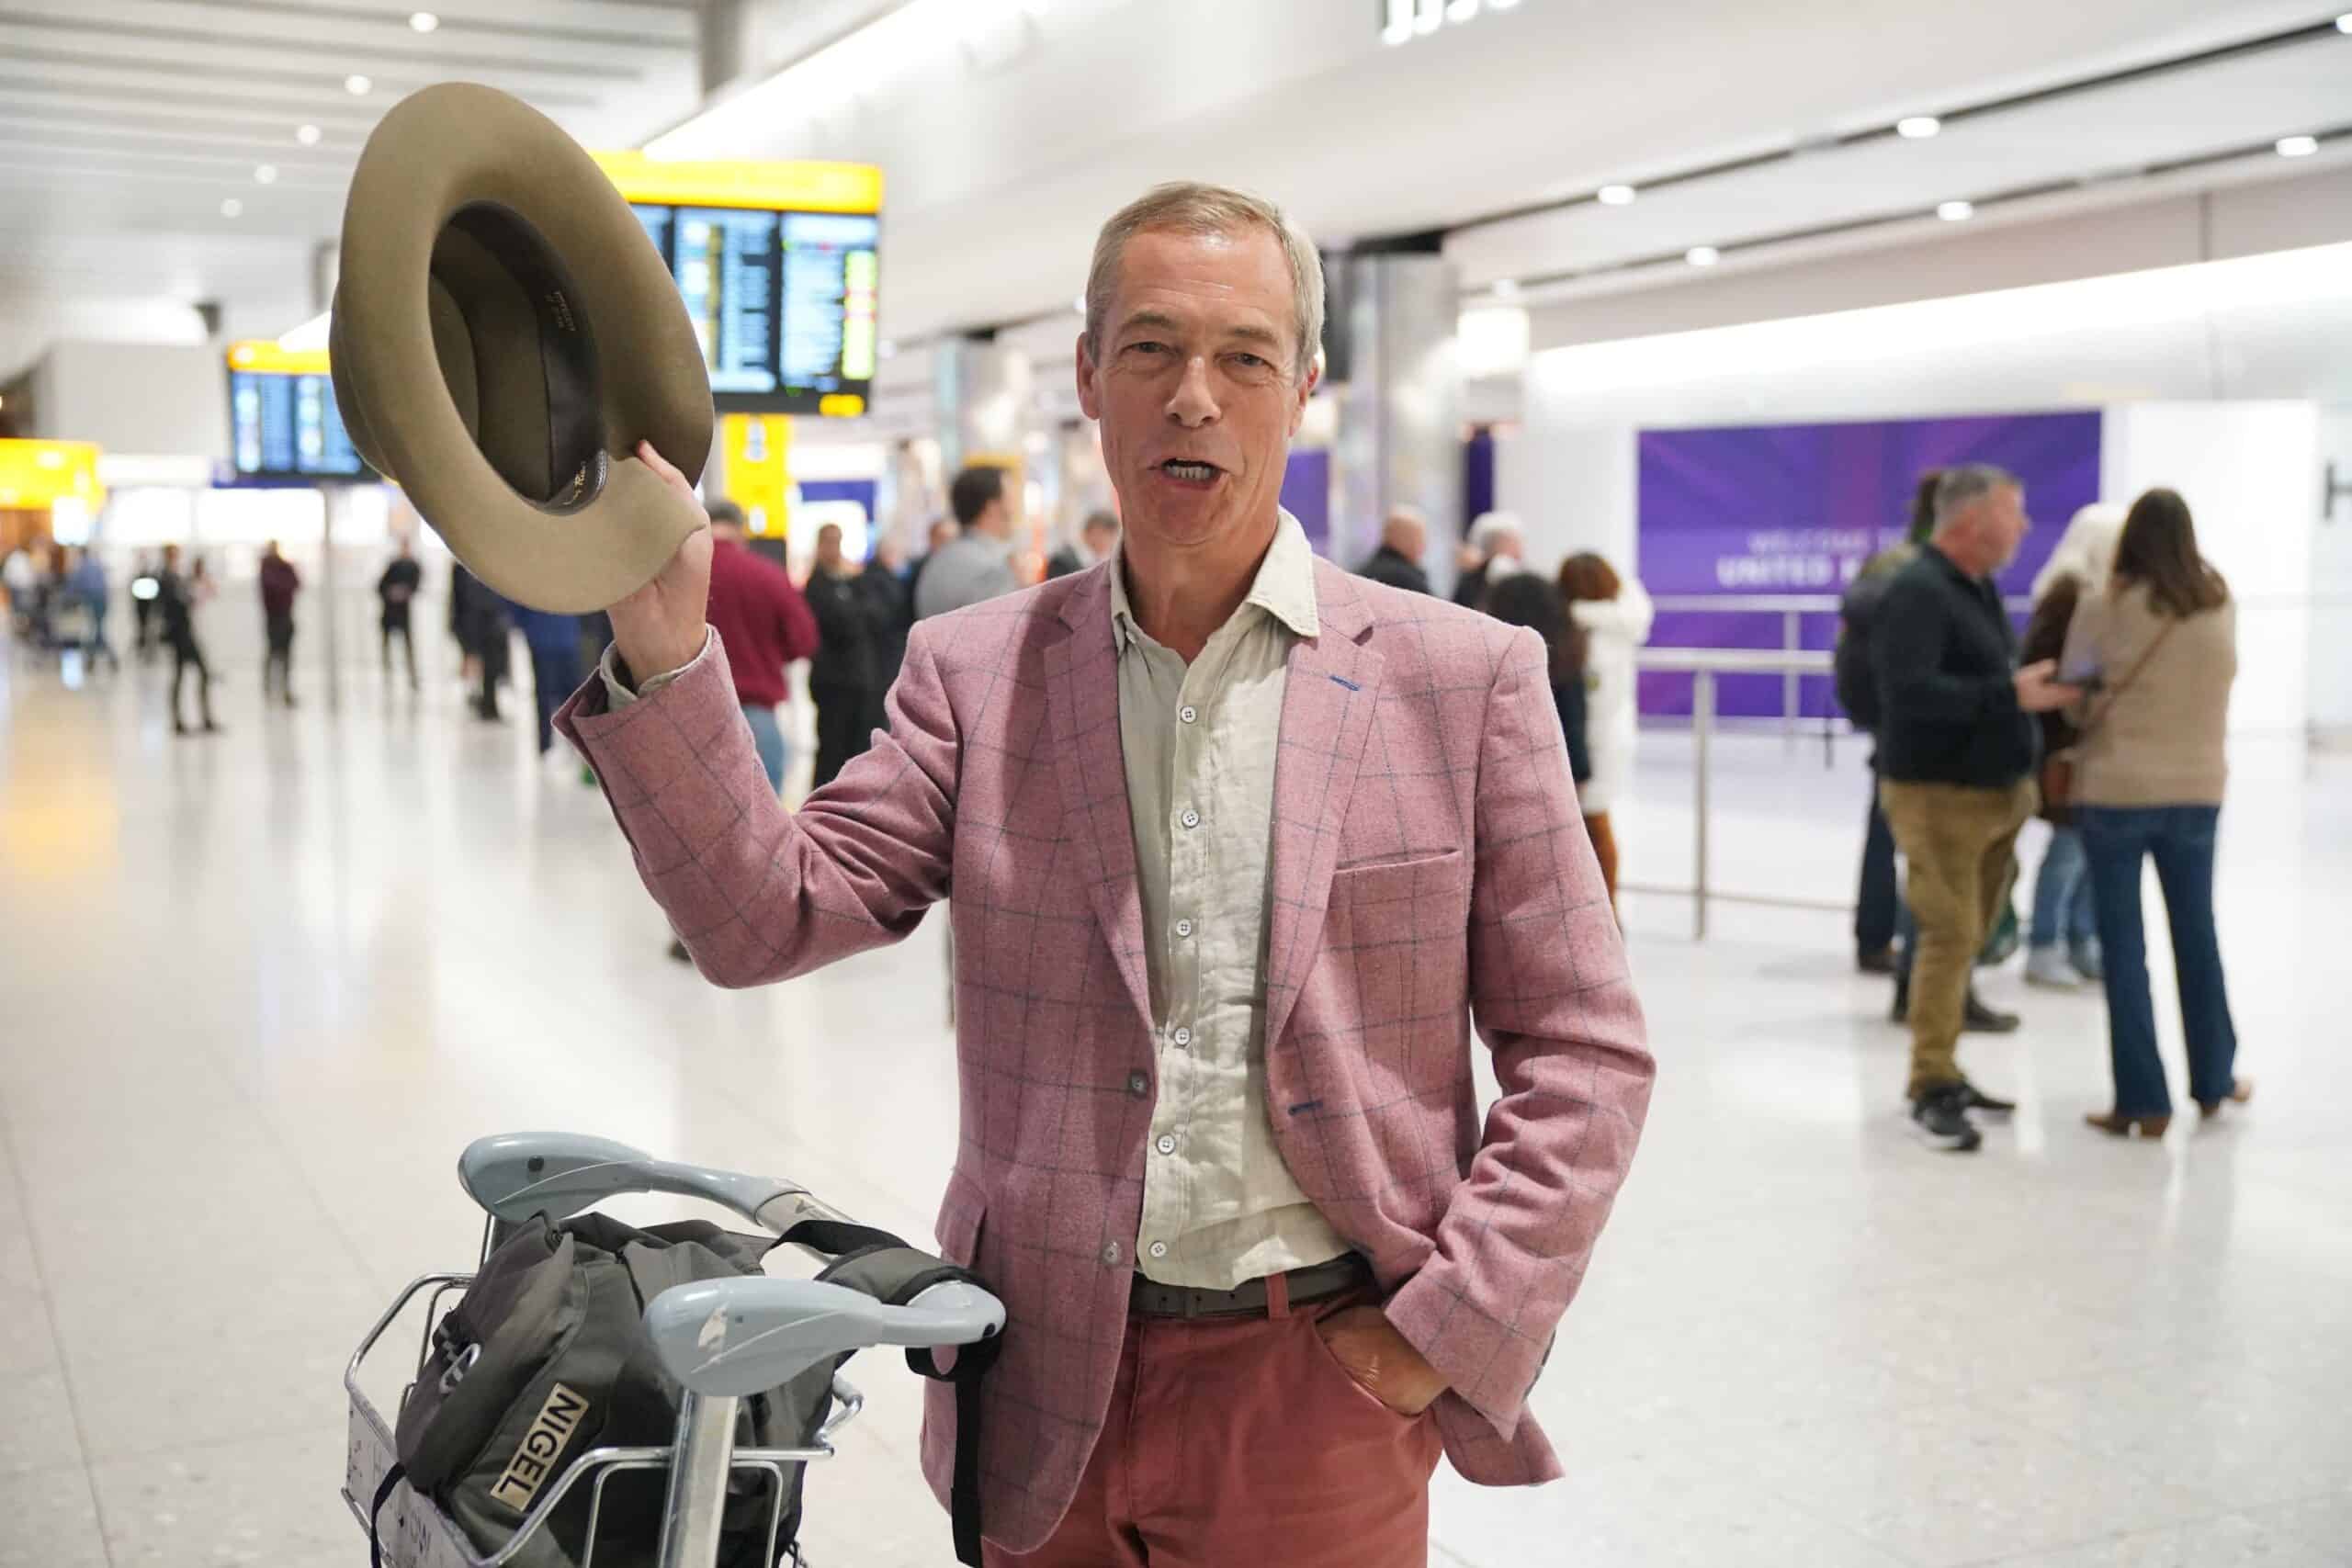 ITV ‘played like a fiddle’ as details of Farage’s political comeback revealed